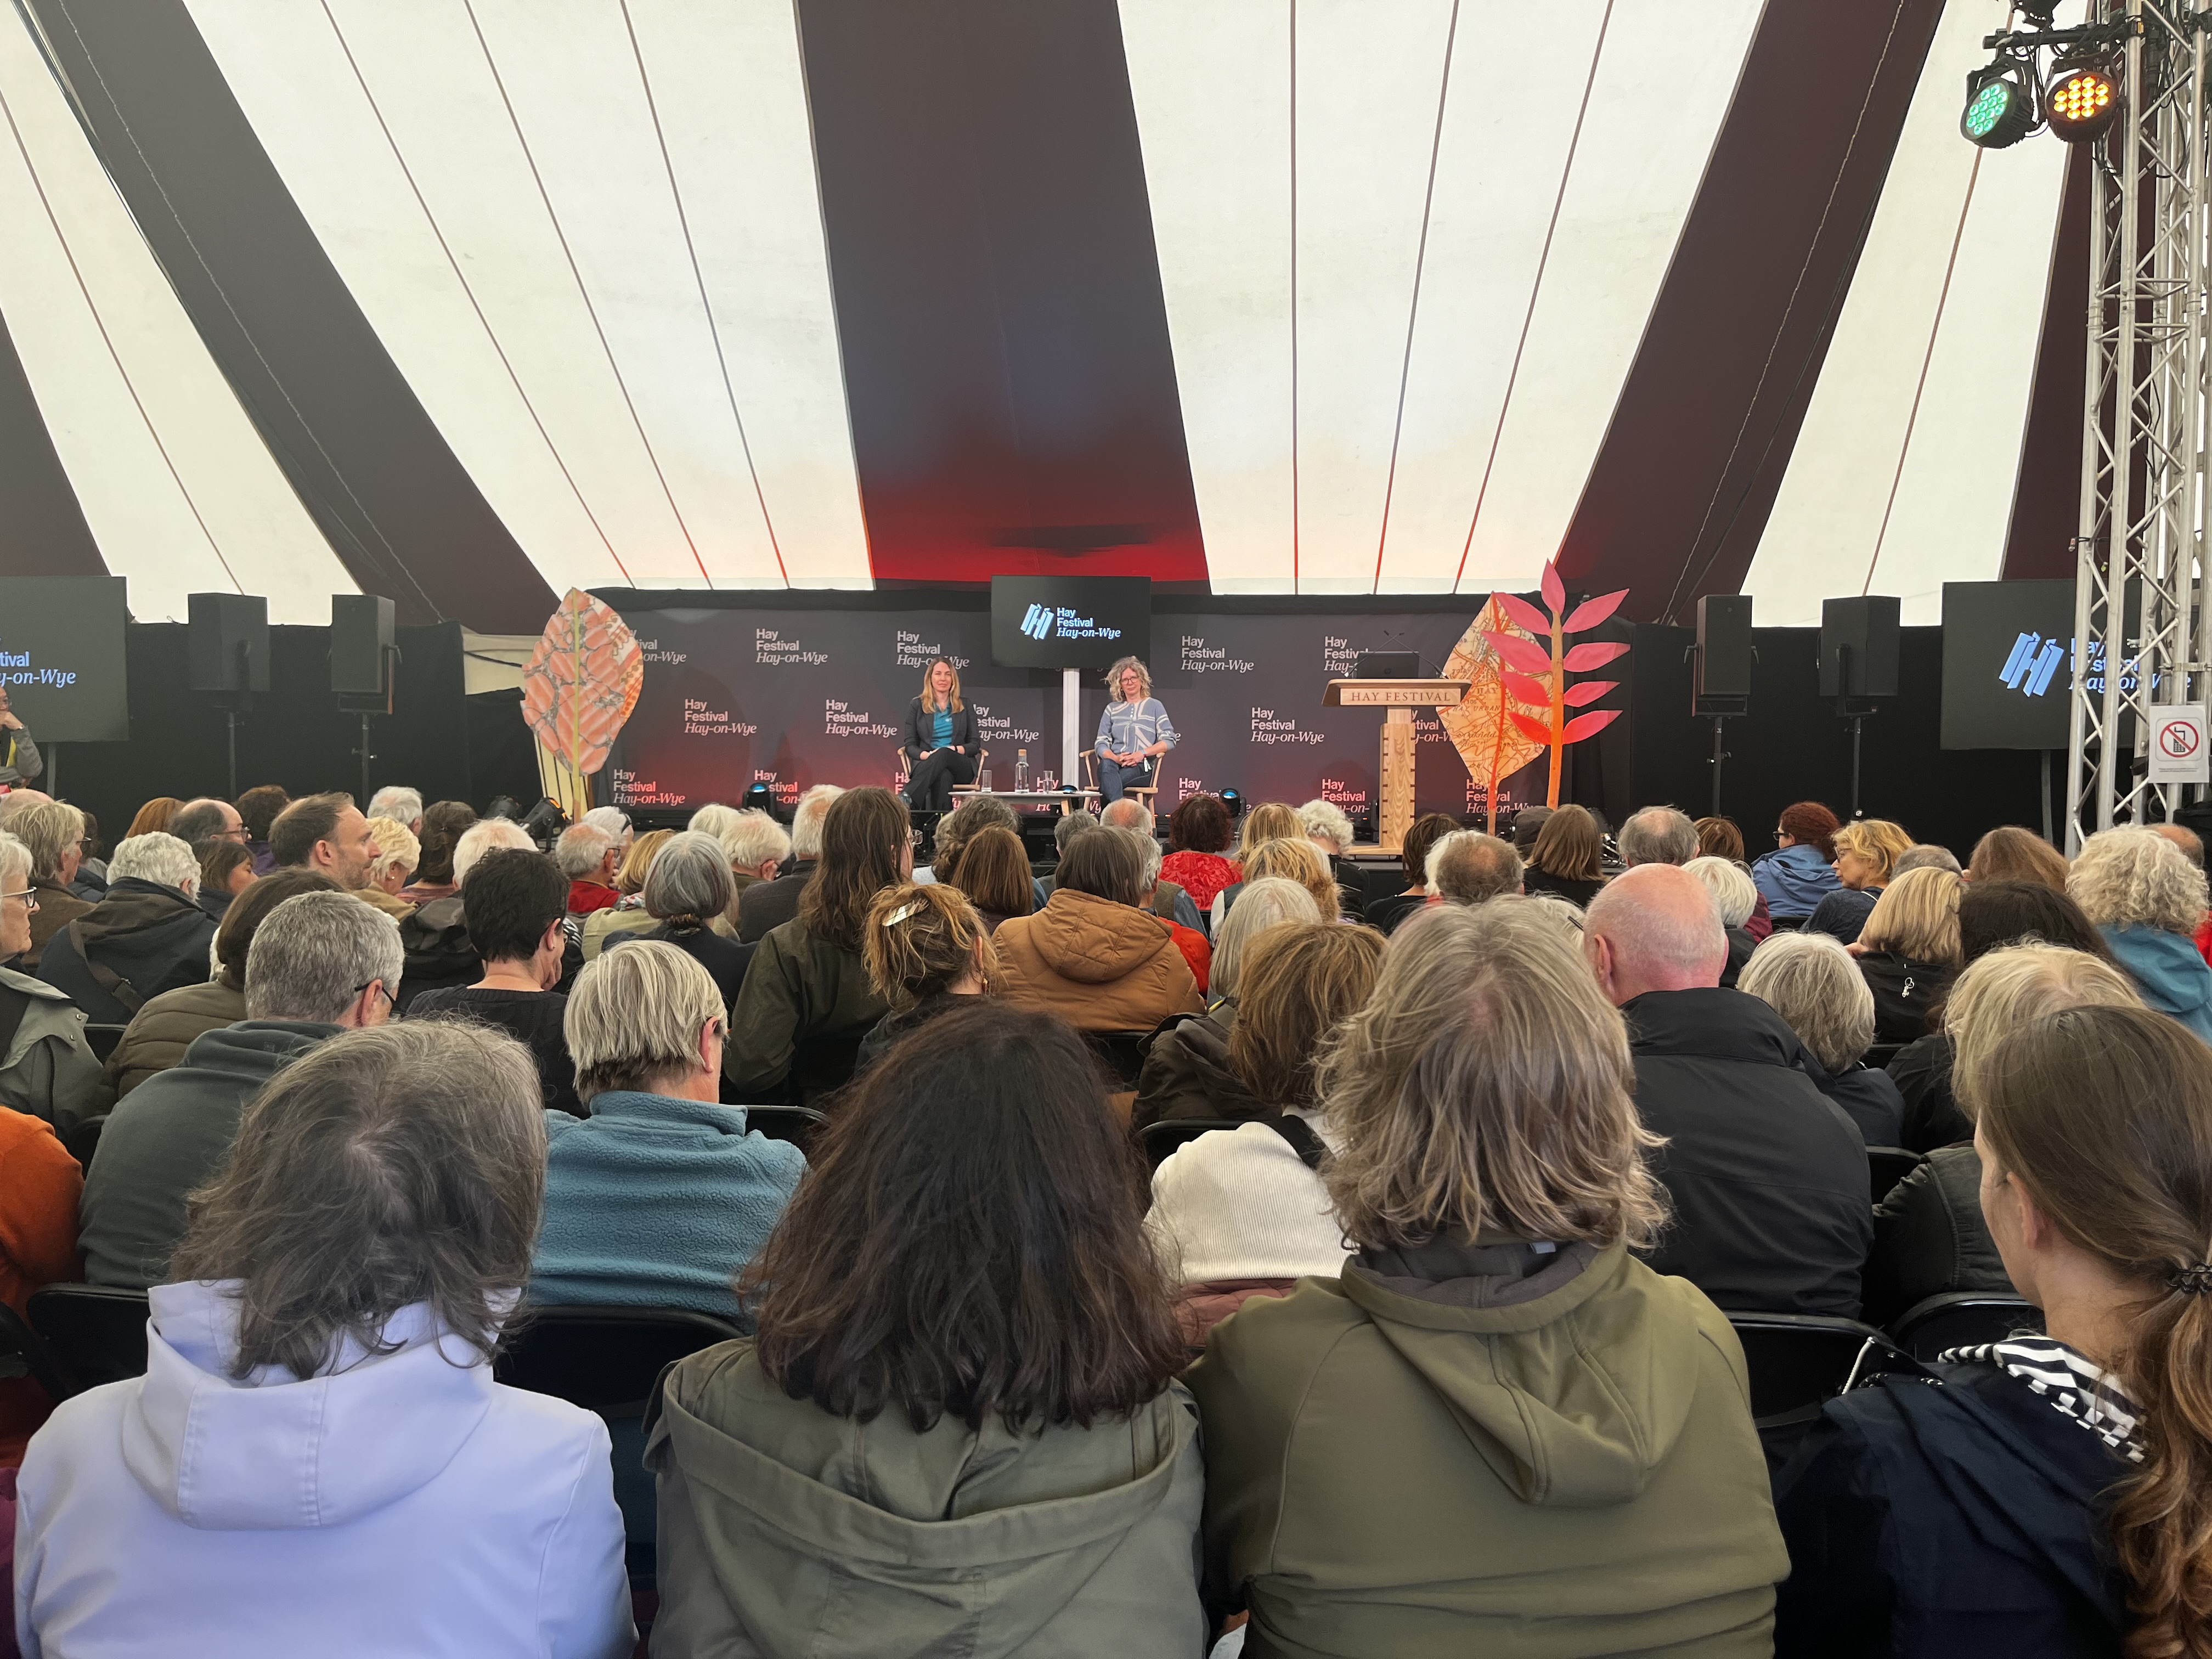 Dr Jennifer Wolowic and Dr Anwen Elias are on stage sitting on chairs, infant of an audience of people at the Hay festival